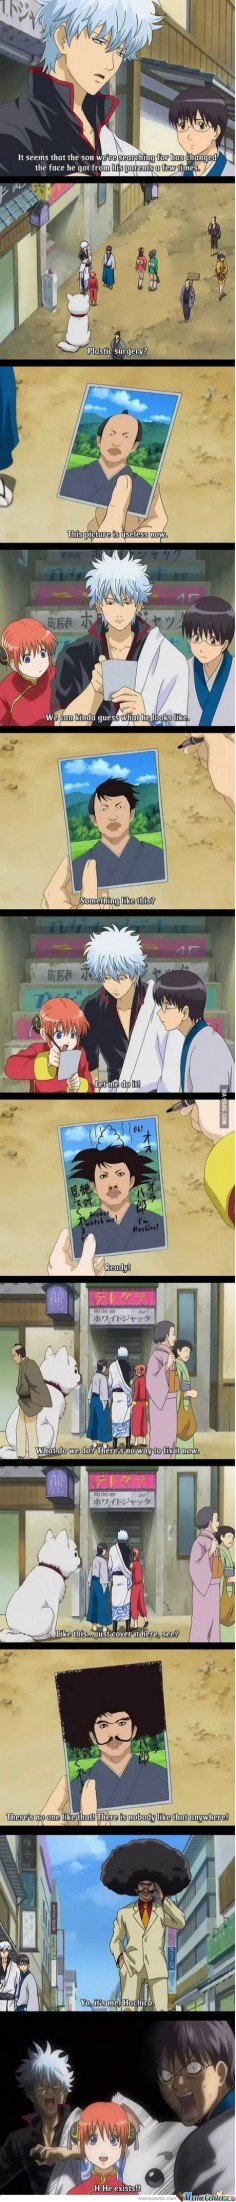 hahaha!! What are the odds. This arc was so hilarious!! Gintama is so stupid and awesome! Love these 3